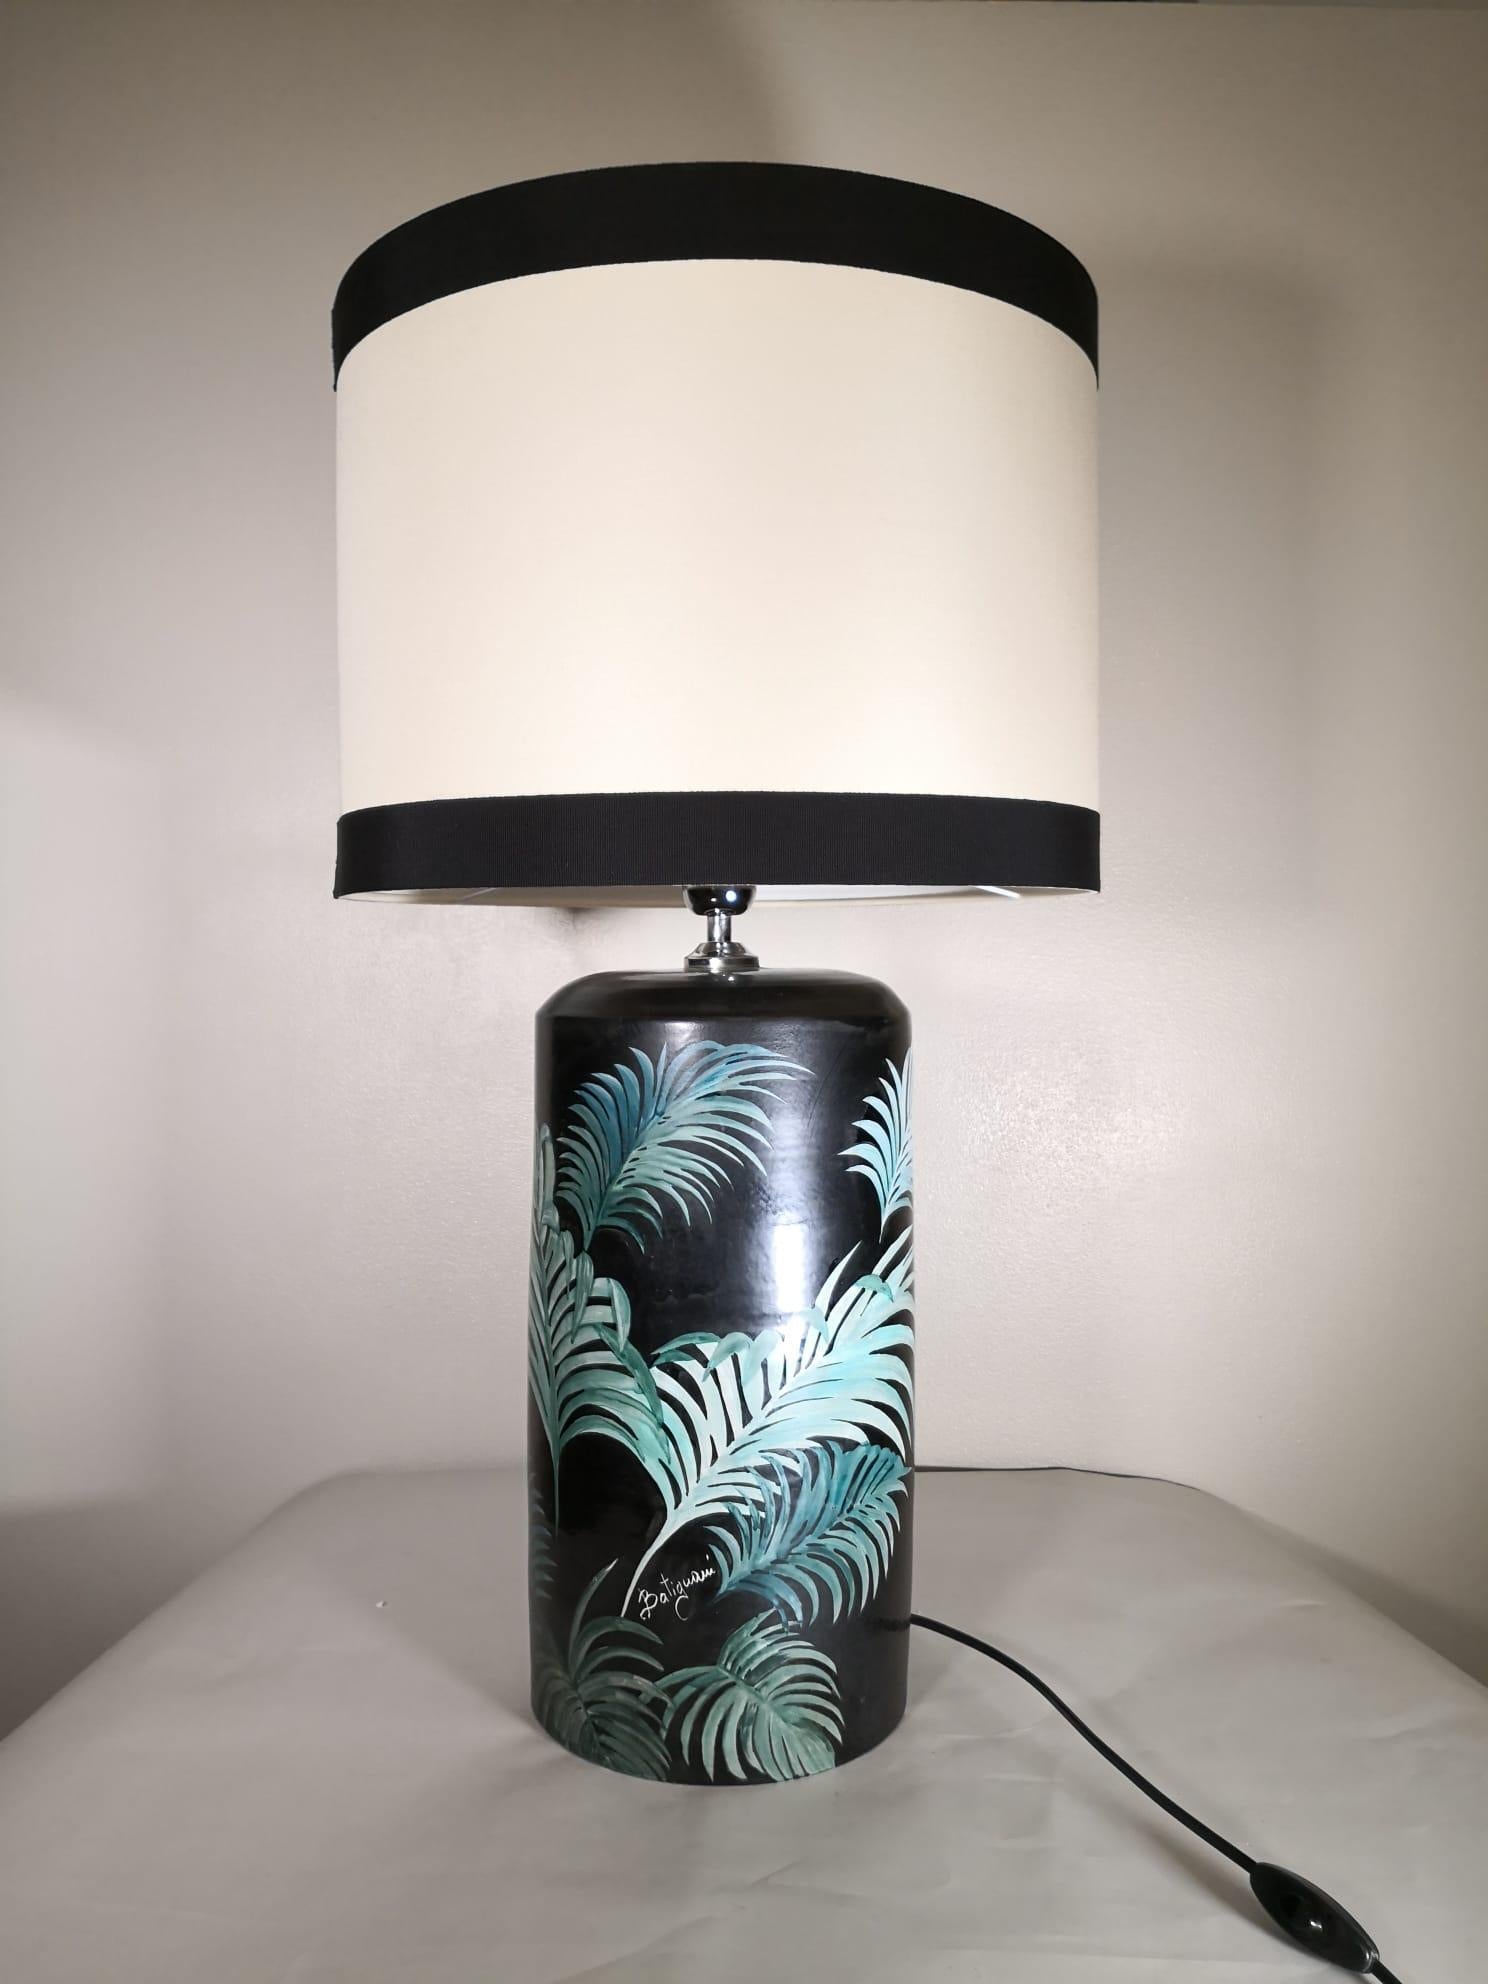 Colorful and exotic artisanal hand painted ceramic lamp portraiting palm leaves on a black background.
This lamp is entirely hand painted by the ceramists of the artisan company 